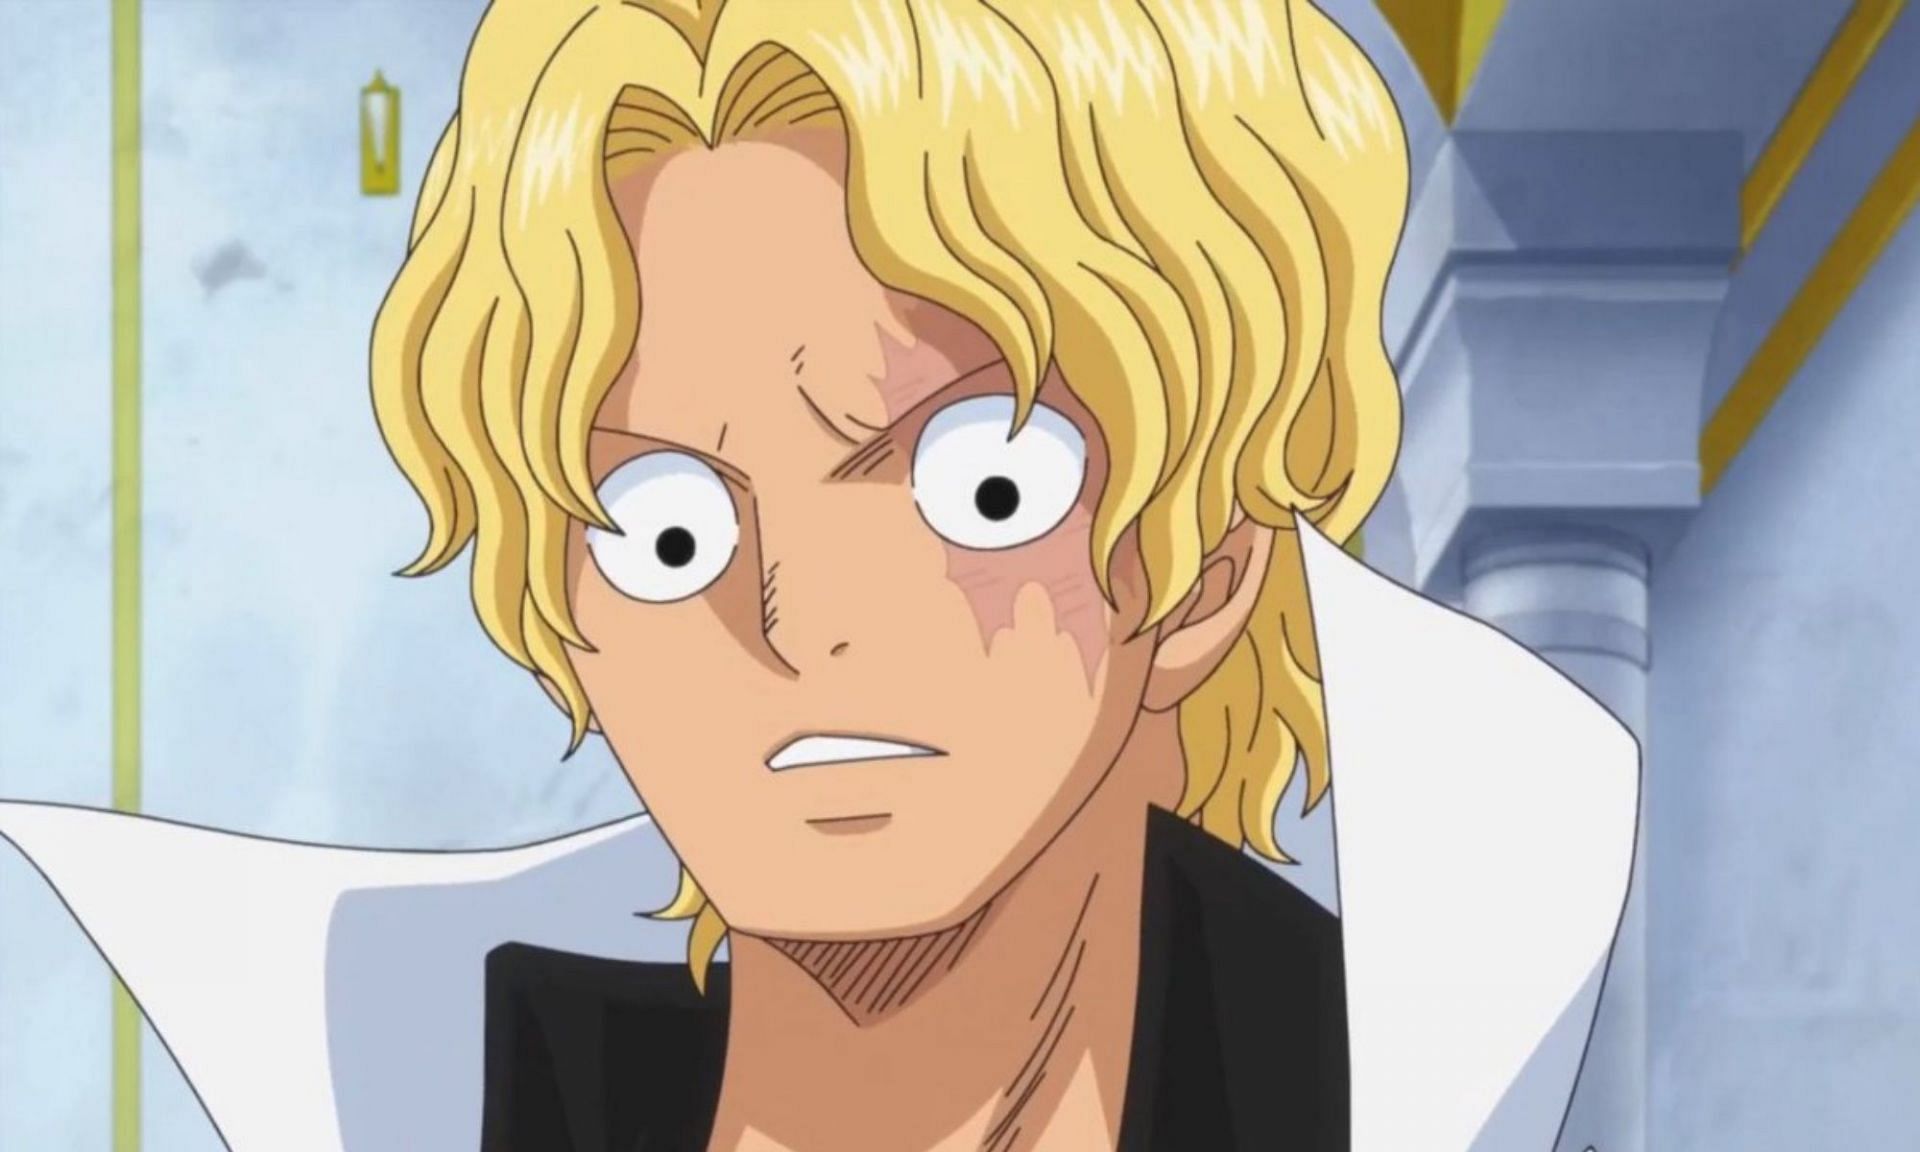 Sabo finds himself in another life threatening situation